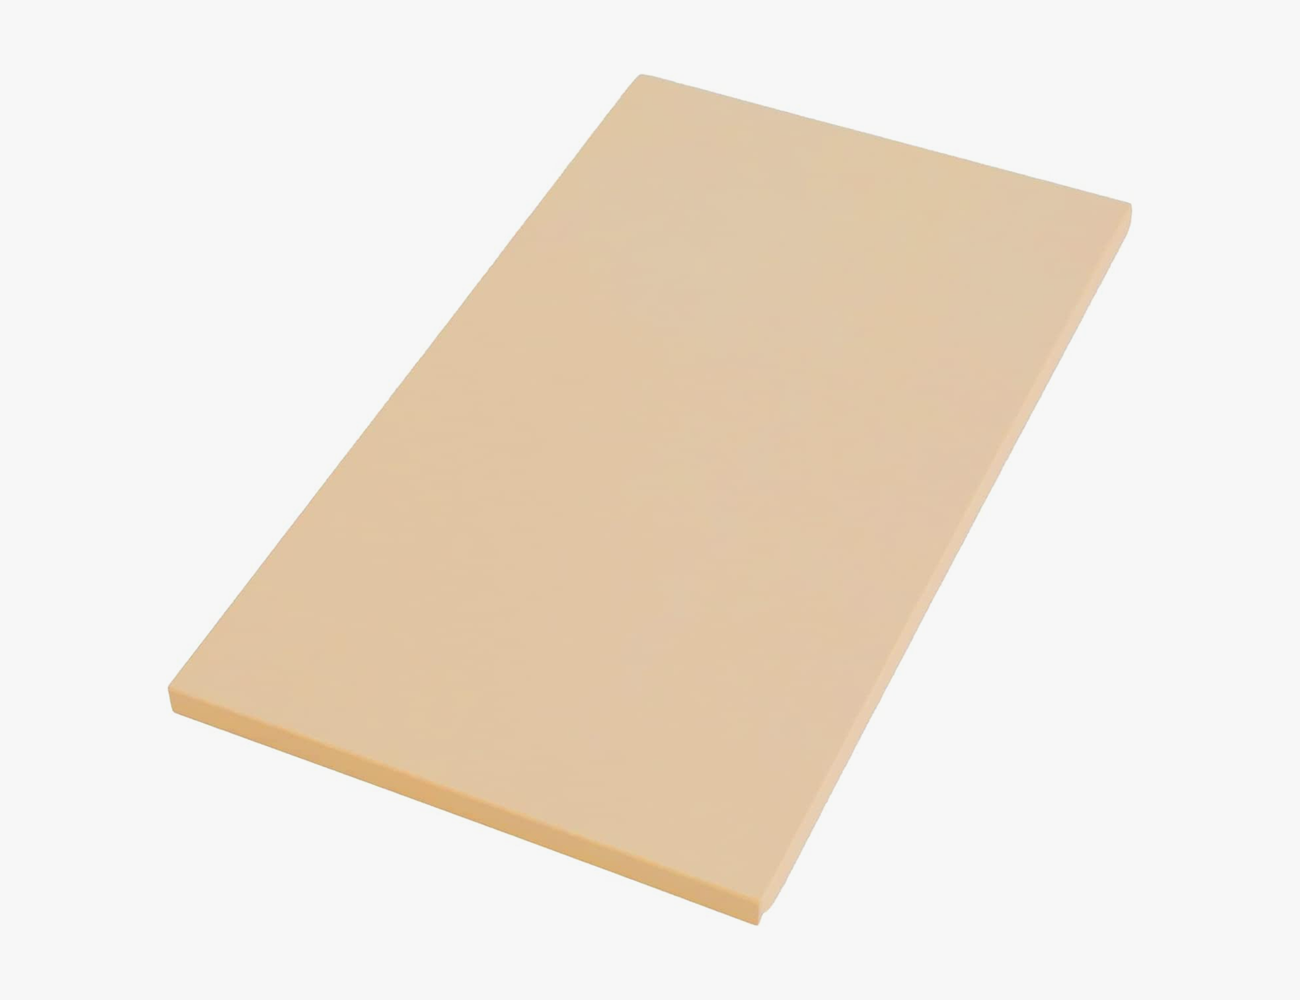 Japanese rubber cutting board Dishwasher Safe Bendable Synthetic